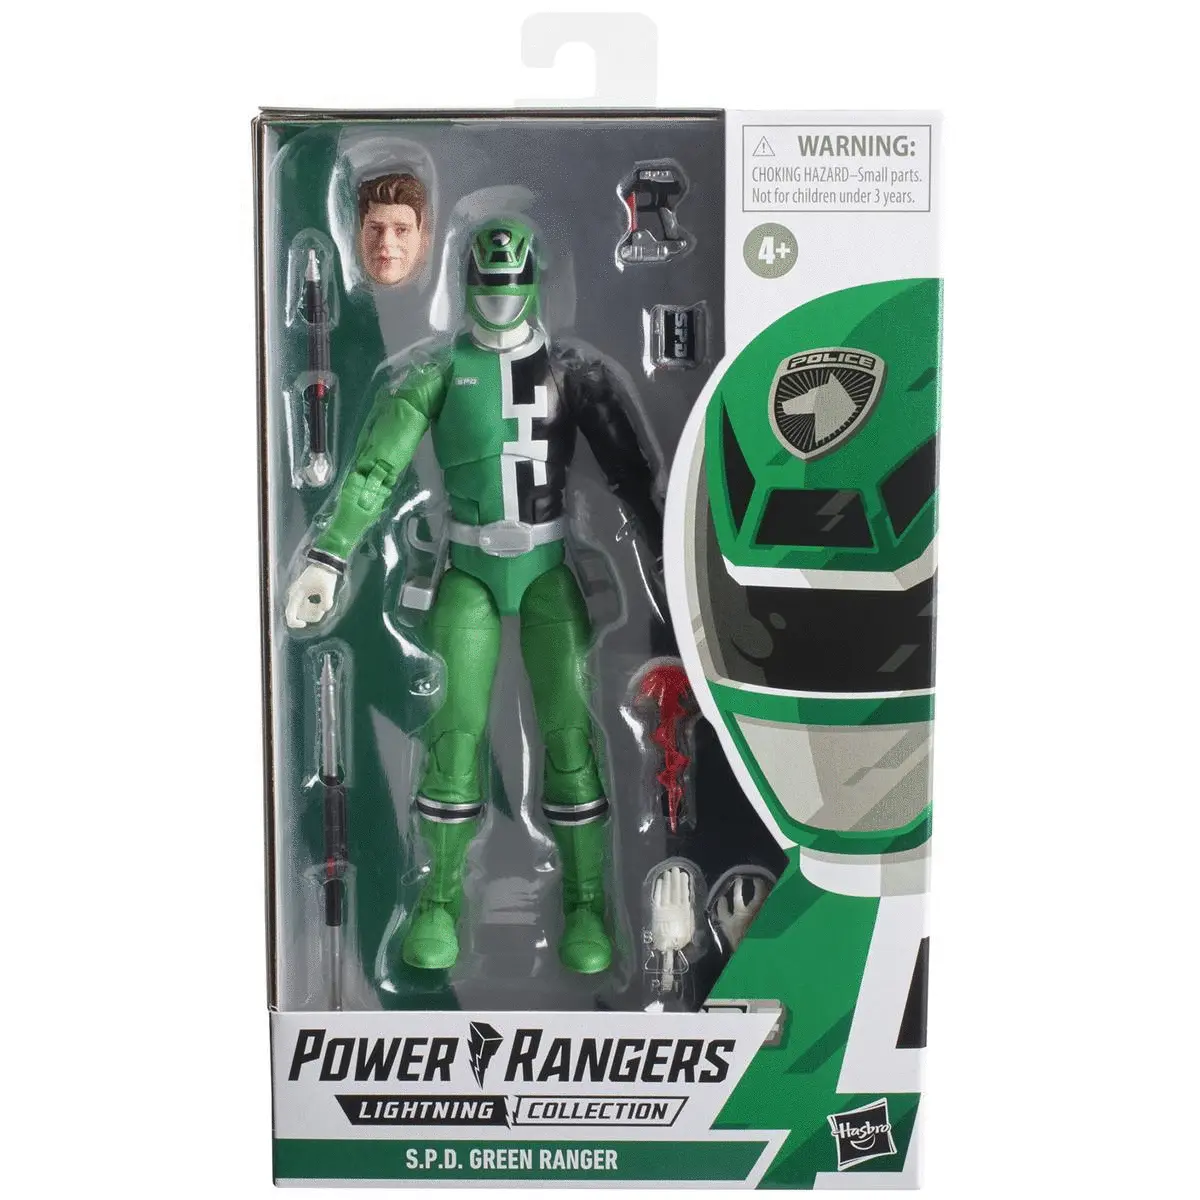 Gif showing the Green ranger from multiple angles